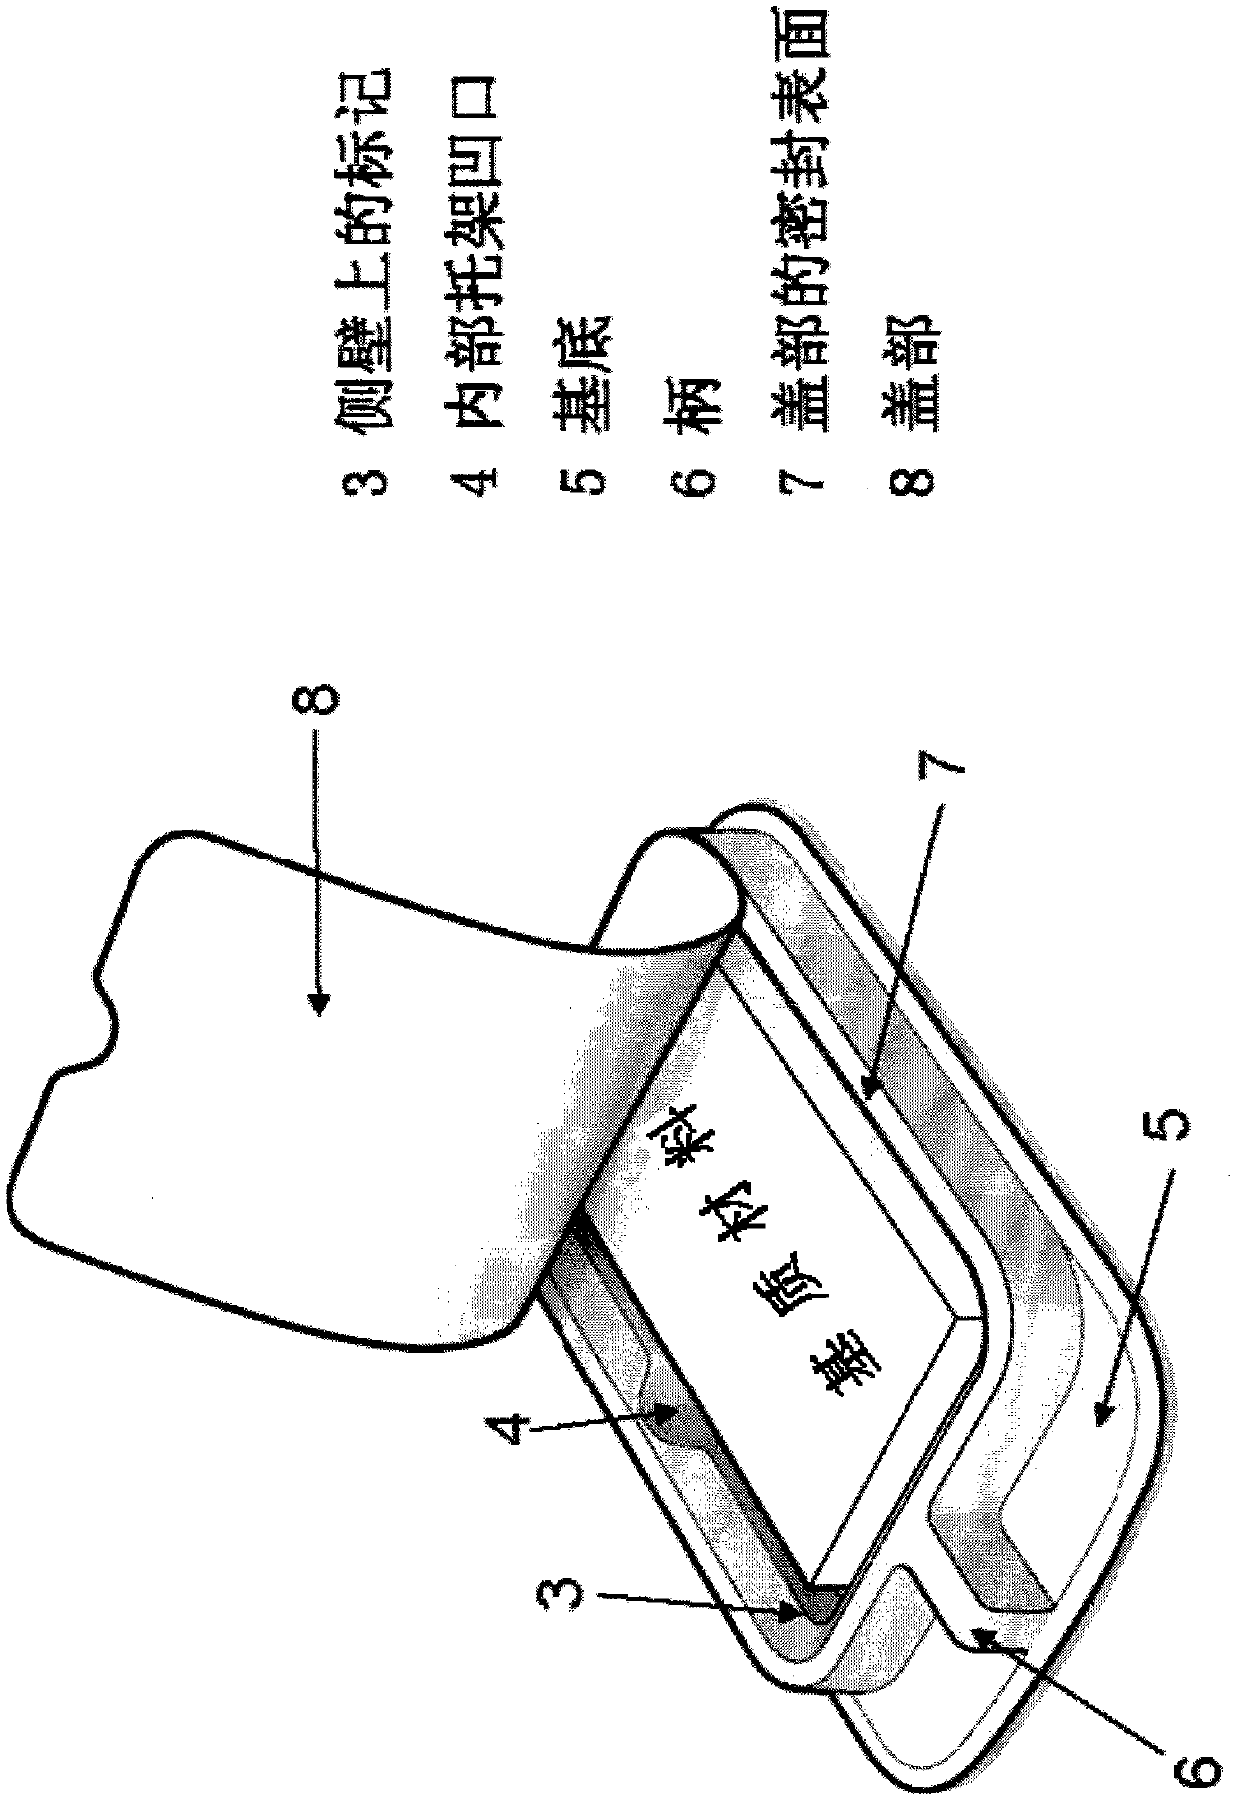 Device for promotion of hemostasis and/or wound healing